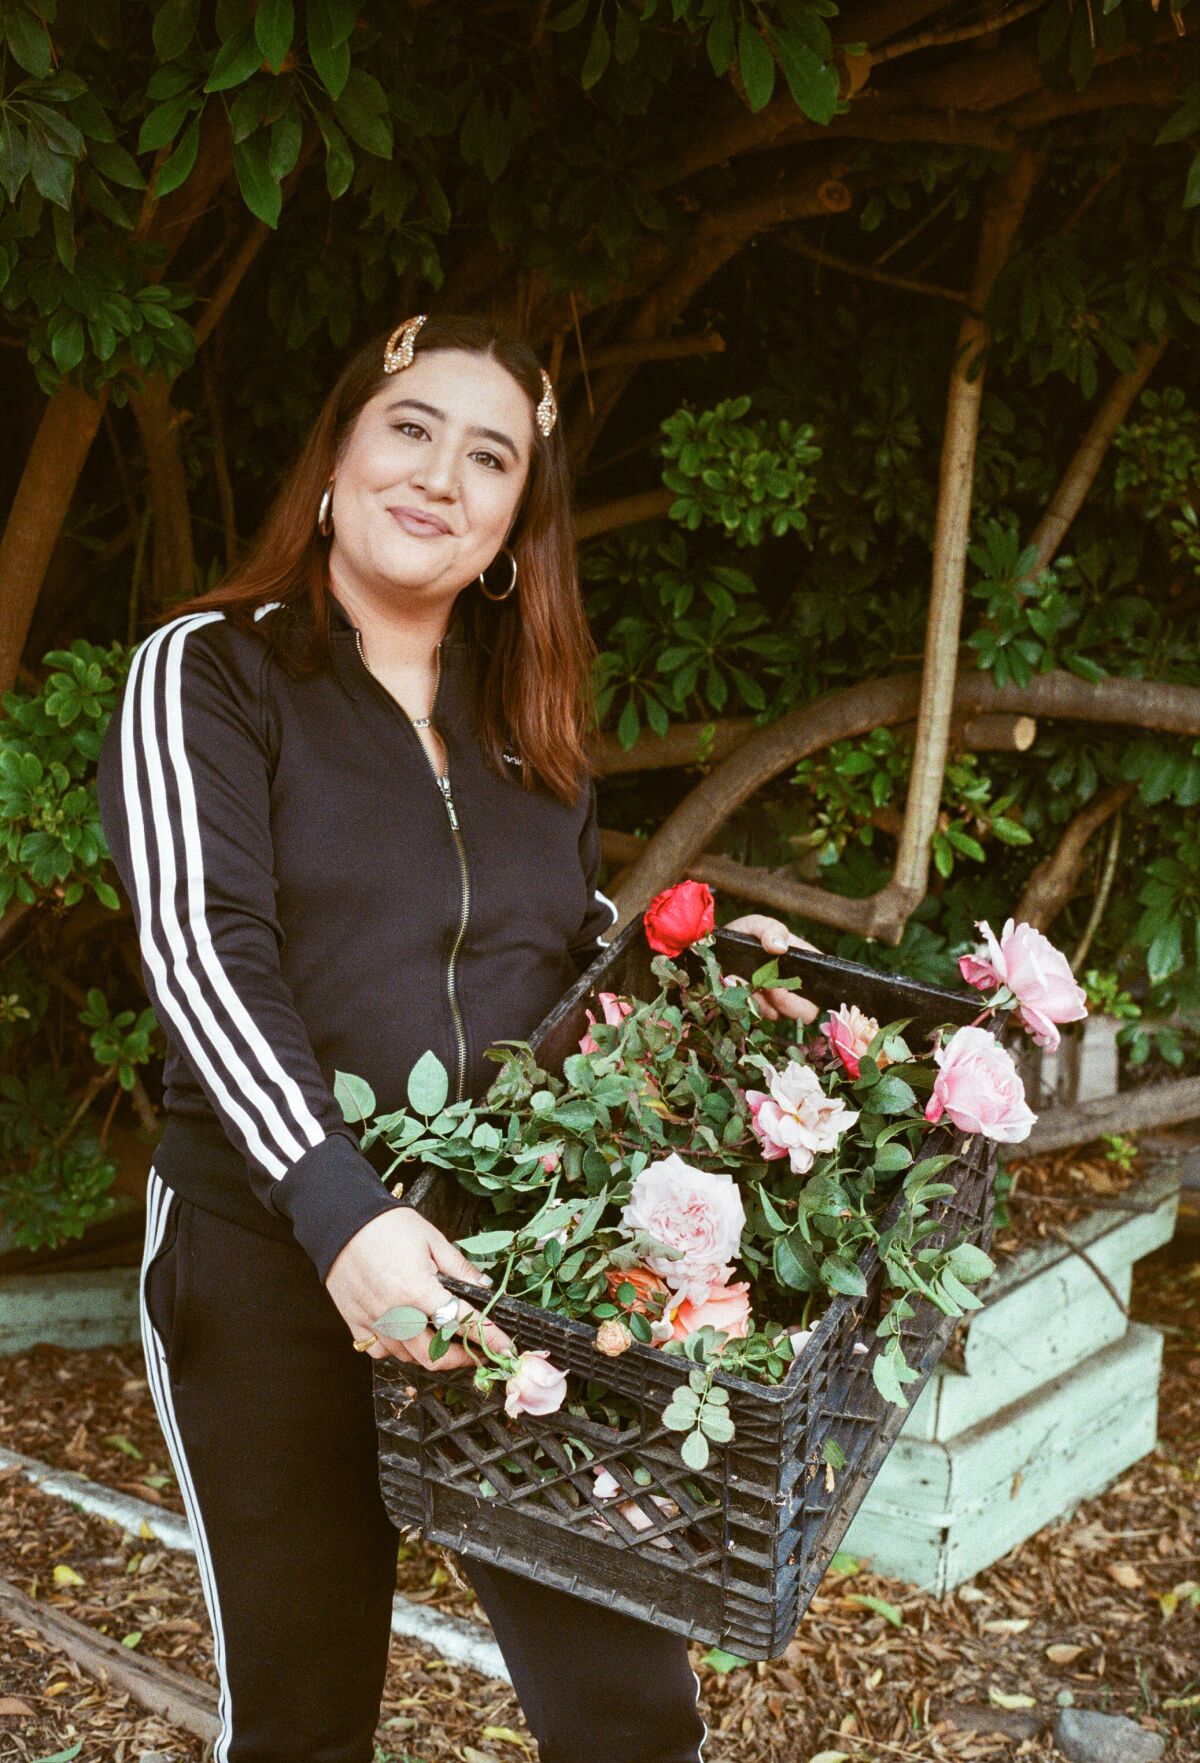 Floral designer Alex Floro carries a crate full of flowers